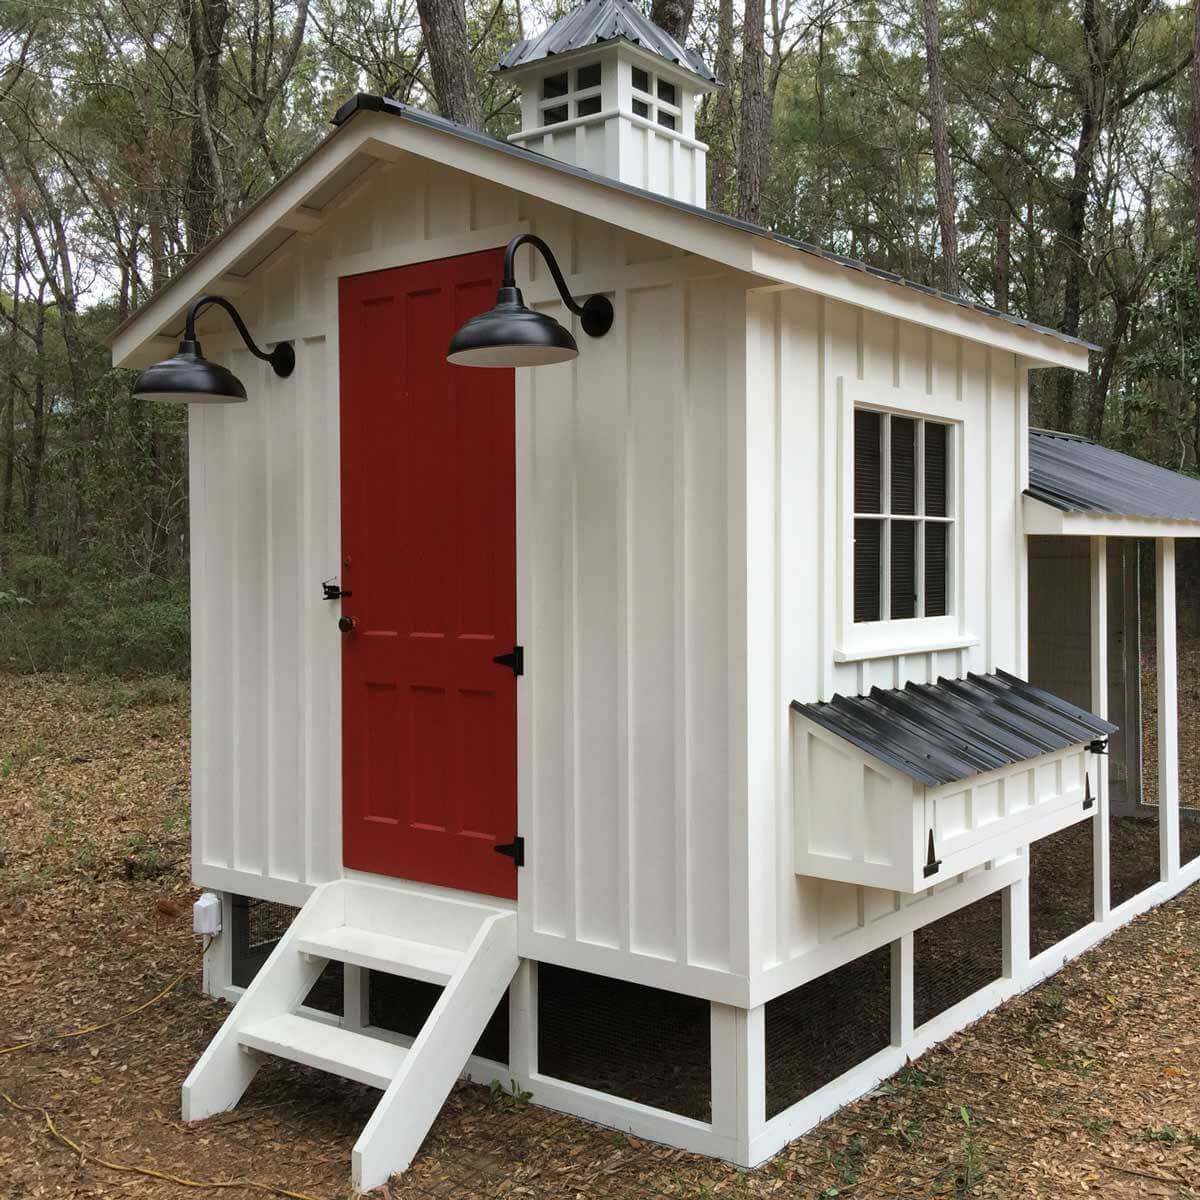 14 Chicken Coop Ideas And Designs You Can Build Yourself 